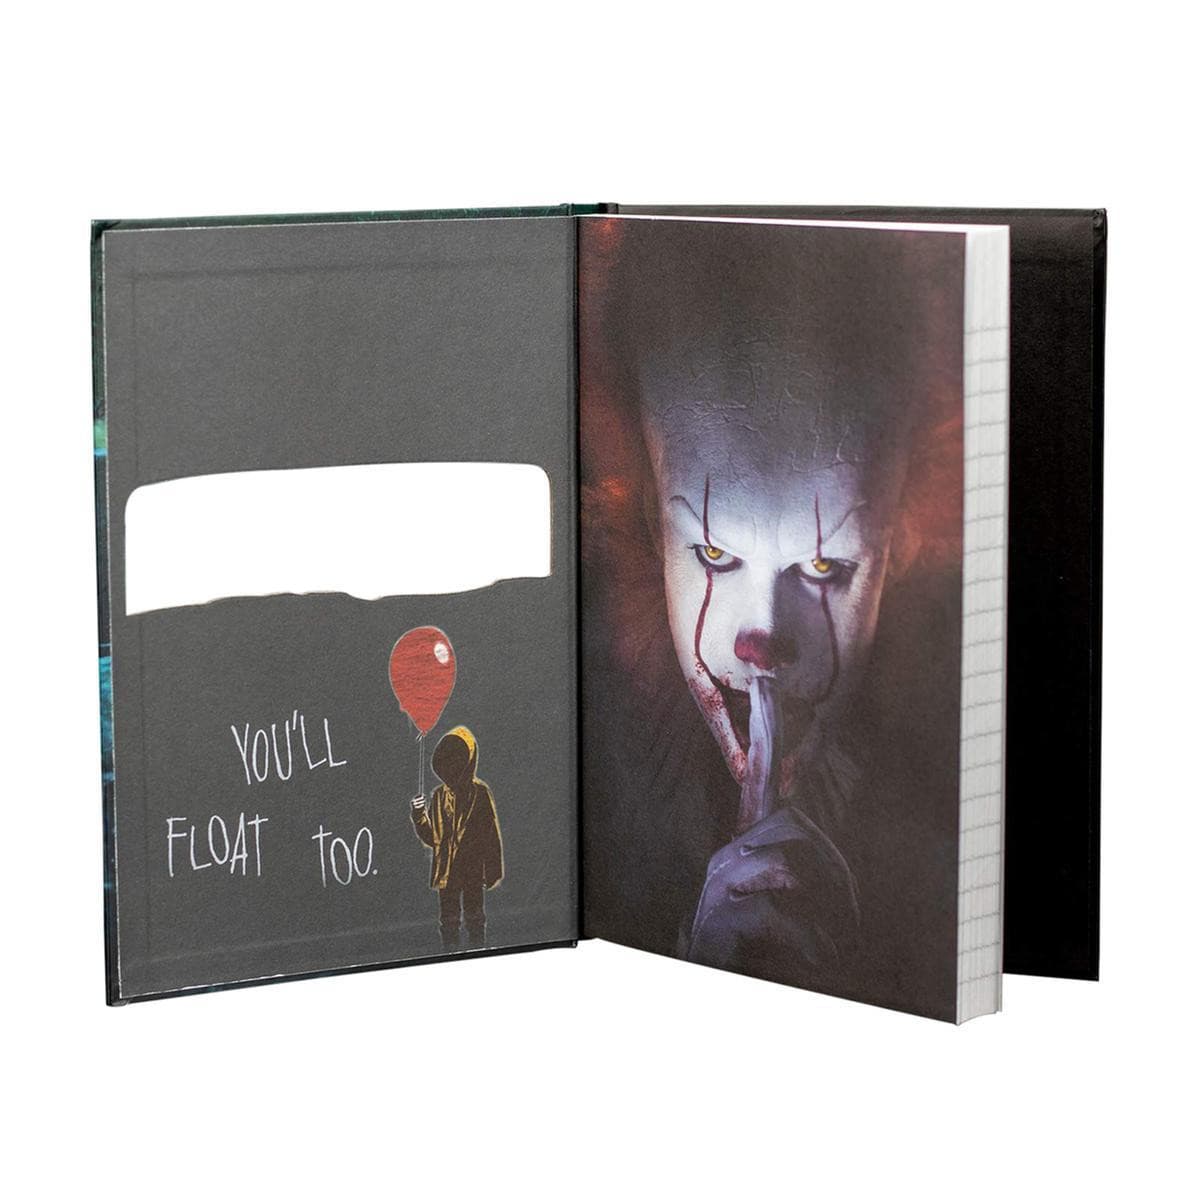 IT - Notebook Premium Pennywise Popstore 